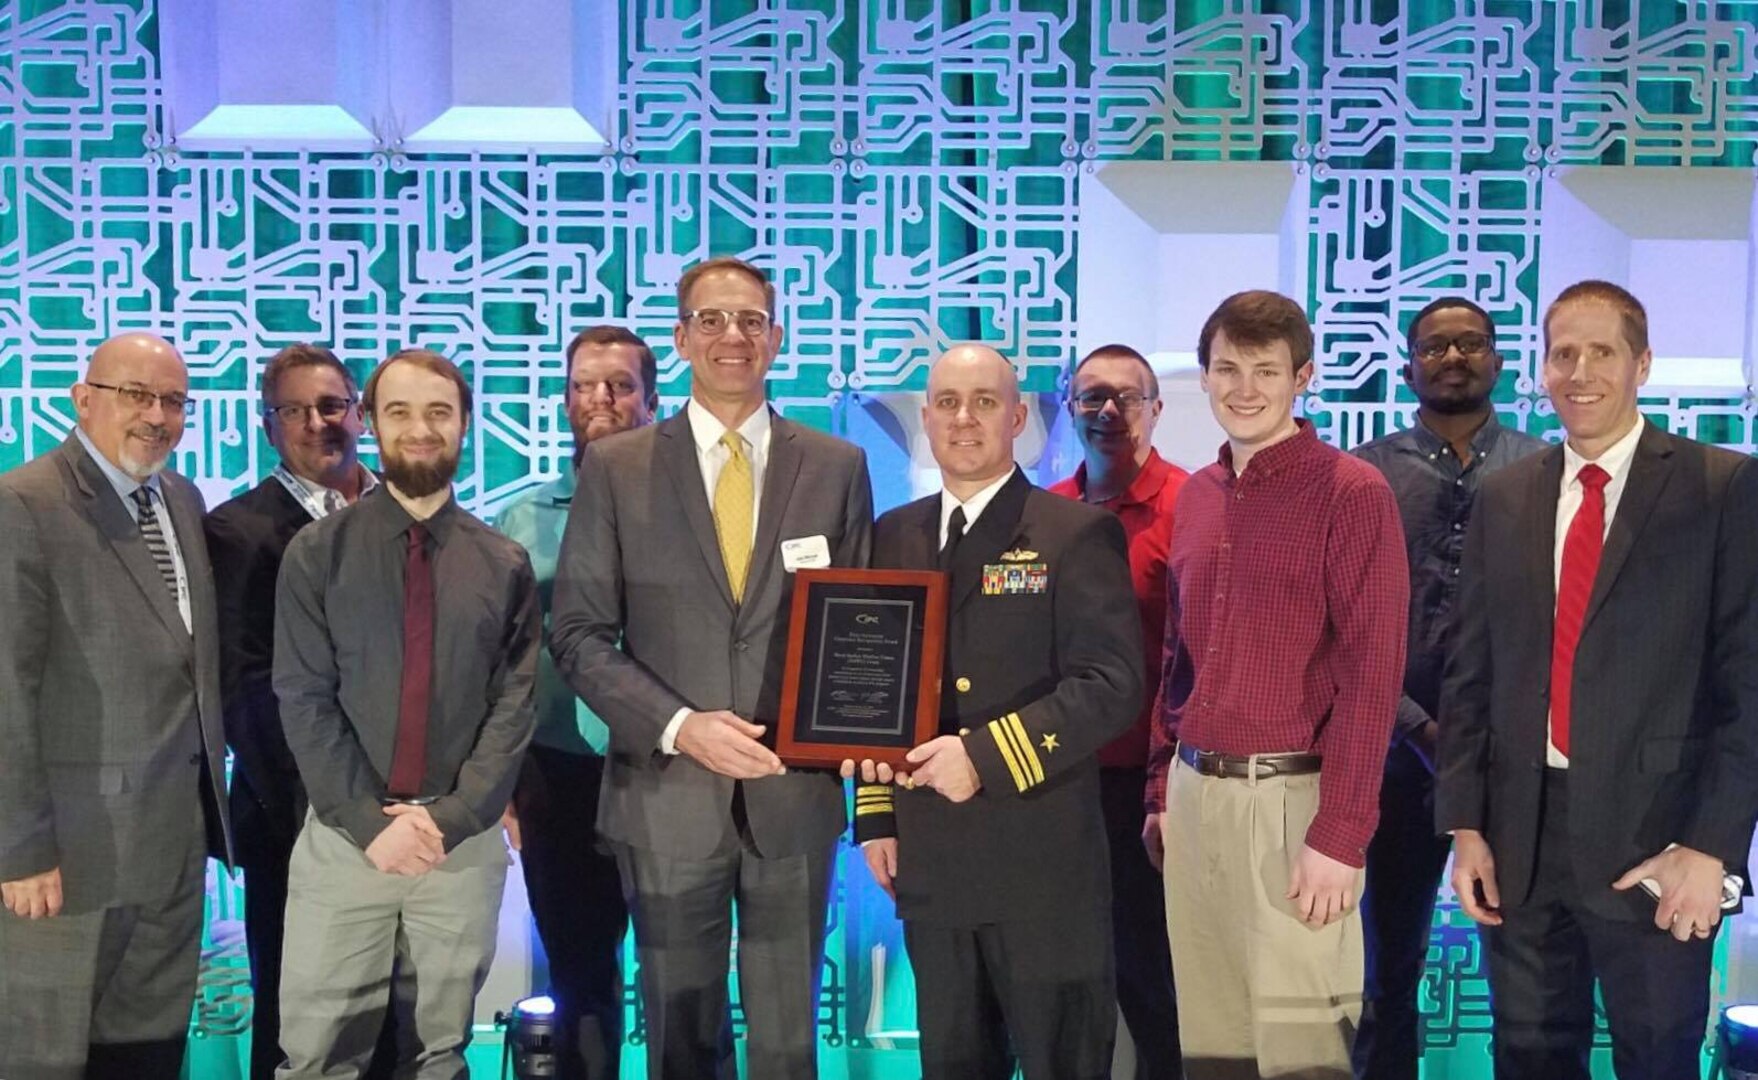 Naval Surface Warfare Center, Crane Division (NSWC Crane) was recognized before an international audience for its contributions to the electronics industry with the IPC - Association Connecting Electronics Industries Peter Sarmanian Corporate Recognition Award. The award was presented to NSWC Crane representatives at the annual IPC APEX EXPO 2019 in San Diego, California on January 29.